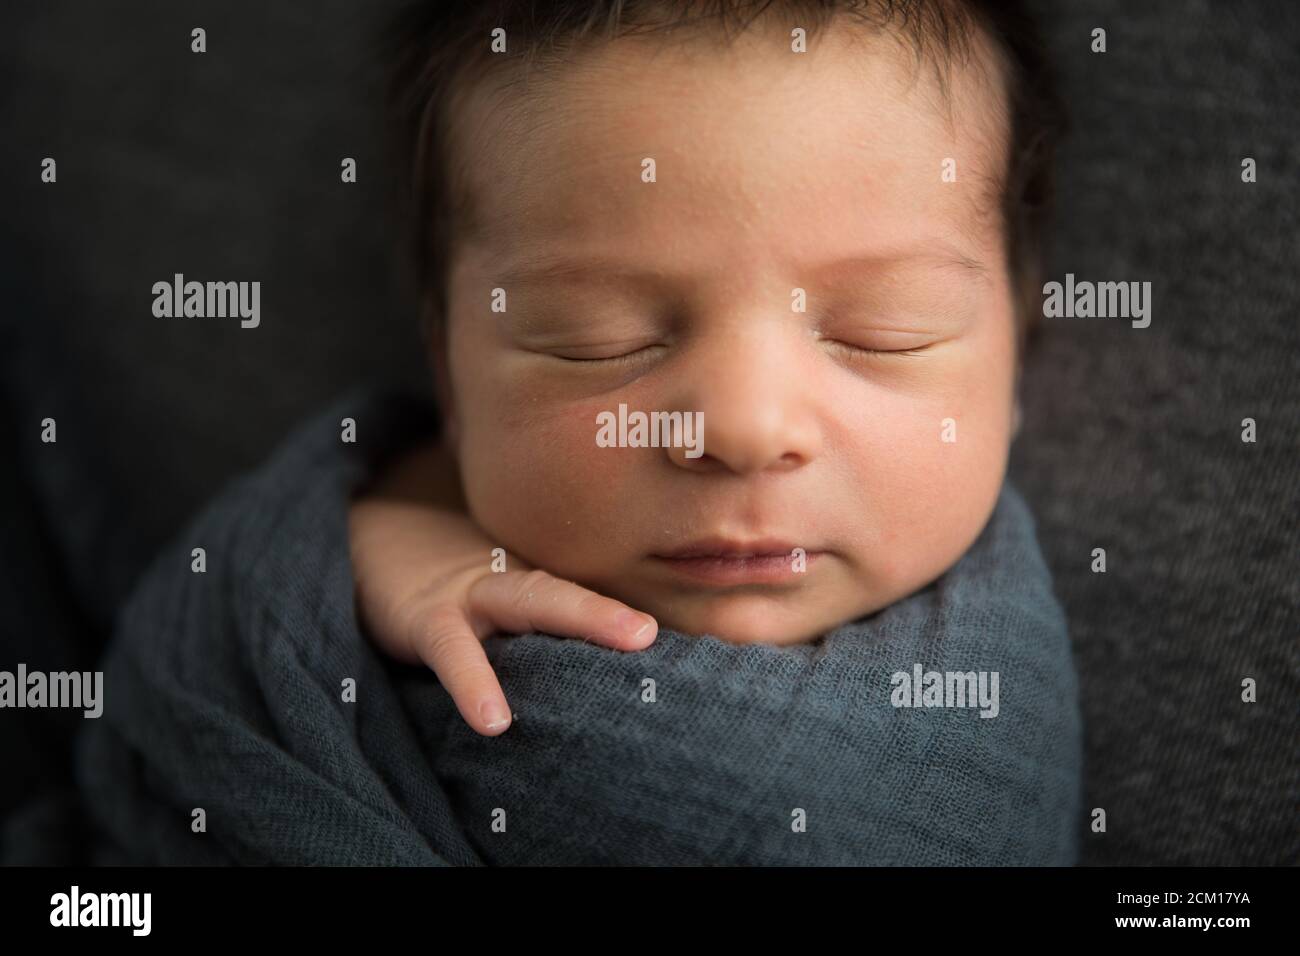 Close Up View of Sleeping Newborn Baby's Face, Lots of Hair Stock Photo